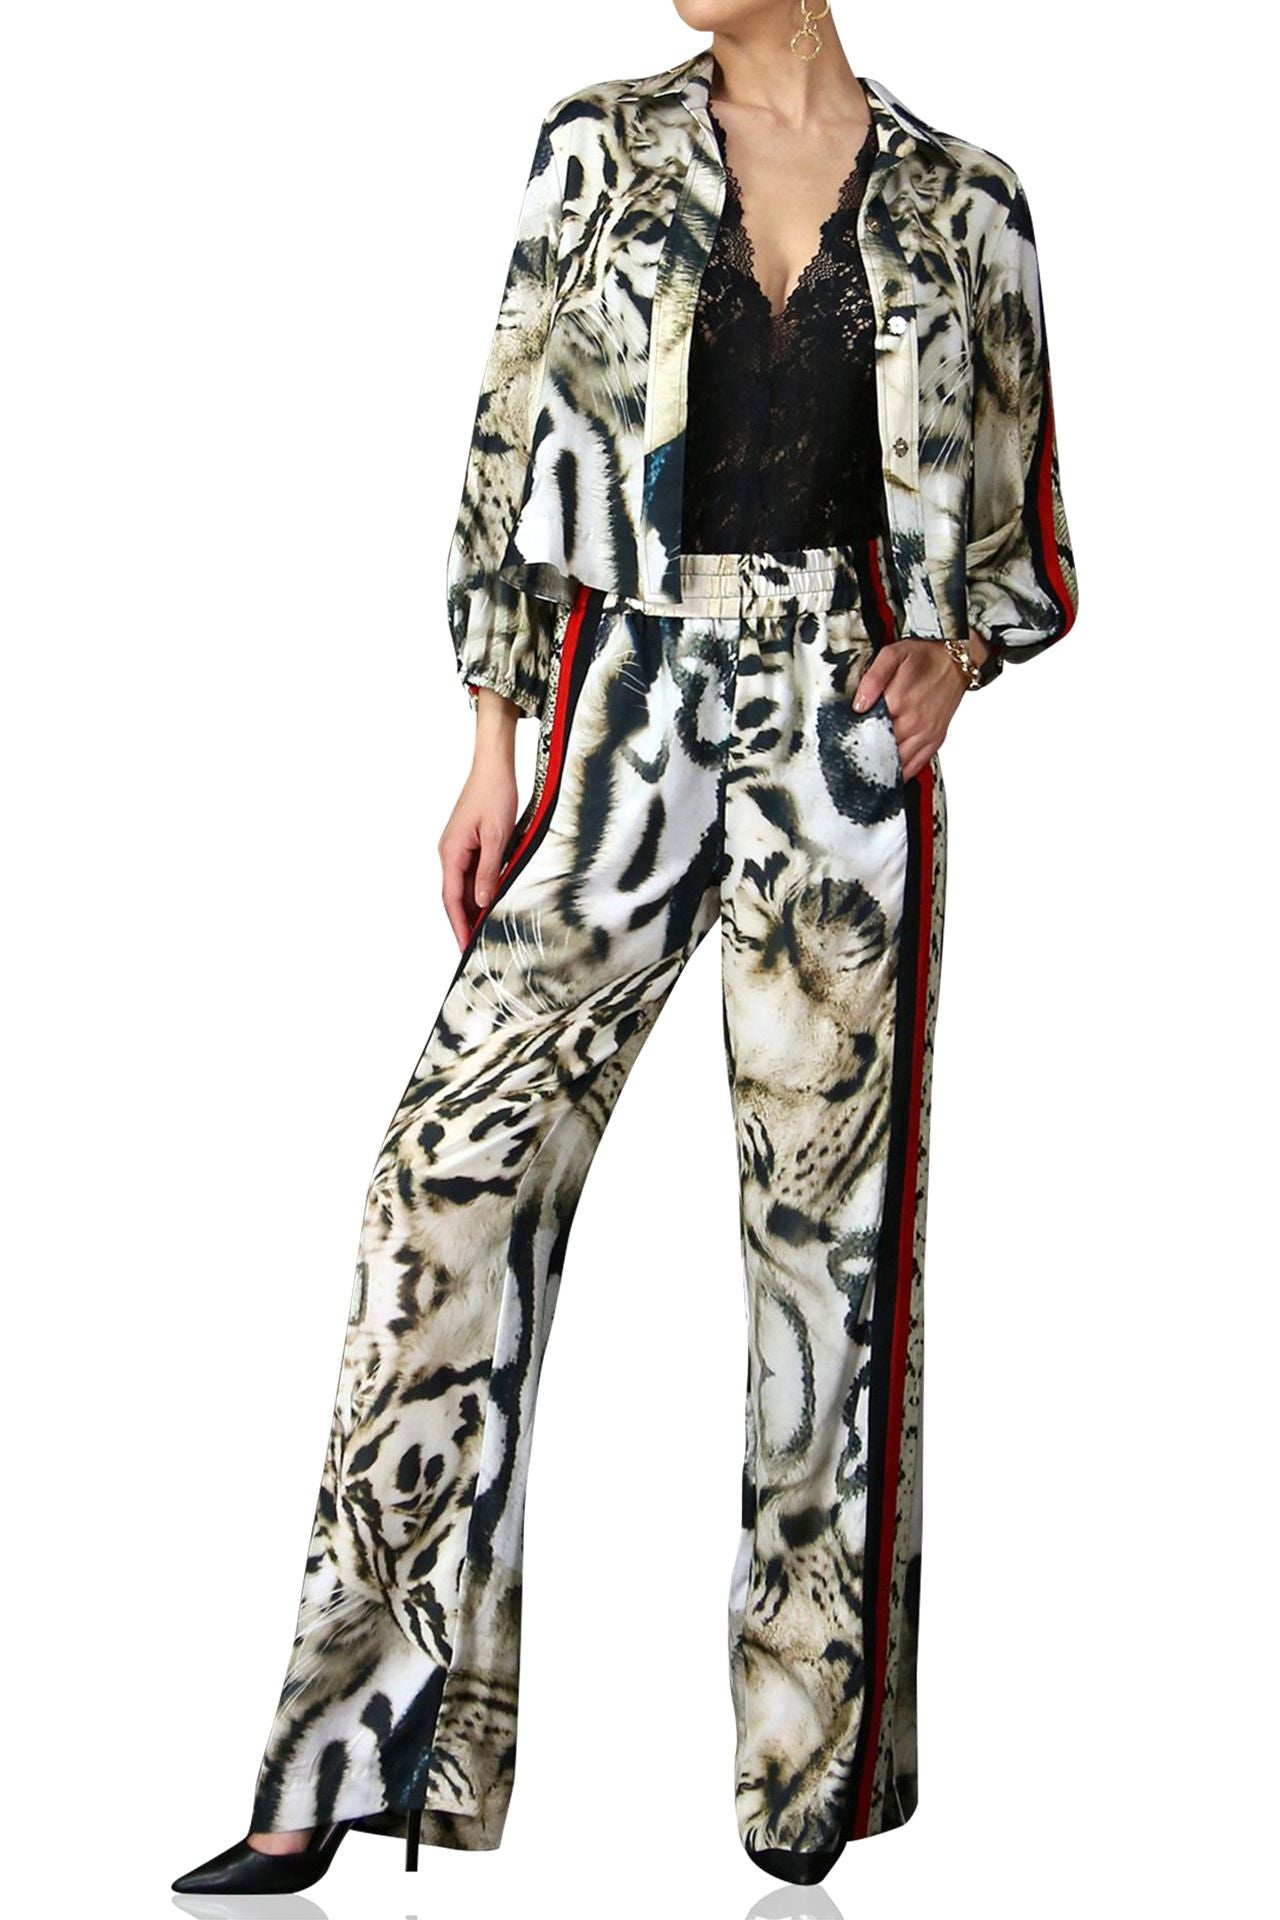 Matching Set in White Tiger Print  Track Suit Cropped Jacket with Pant